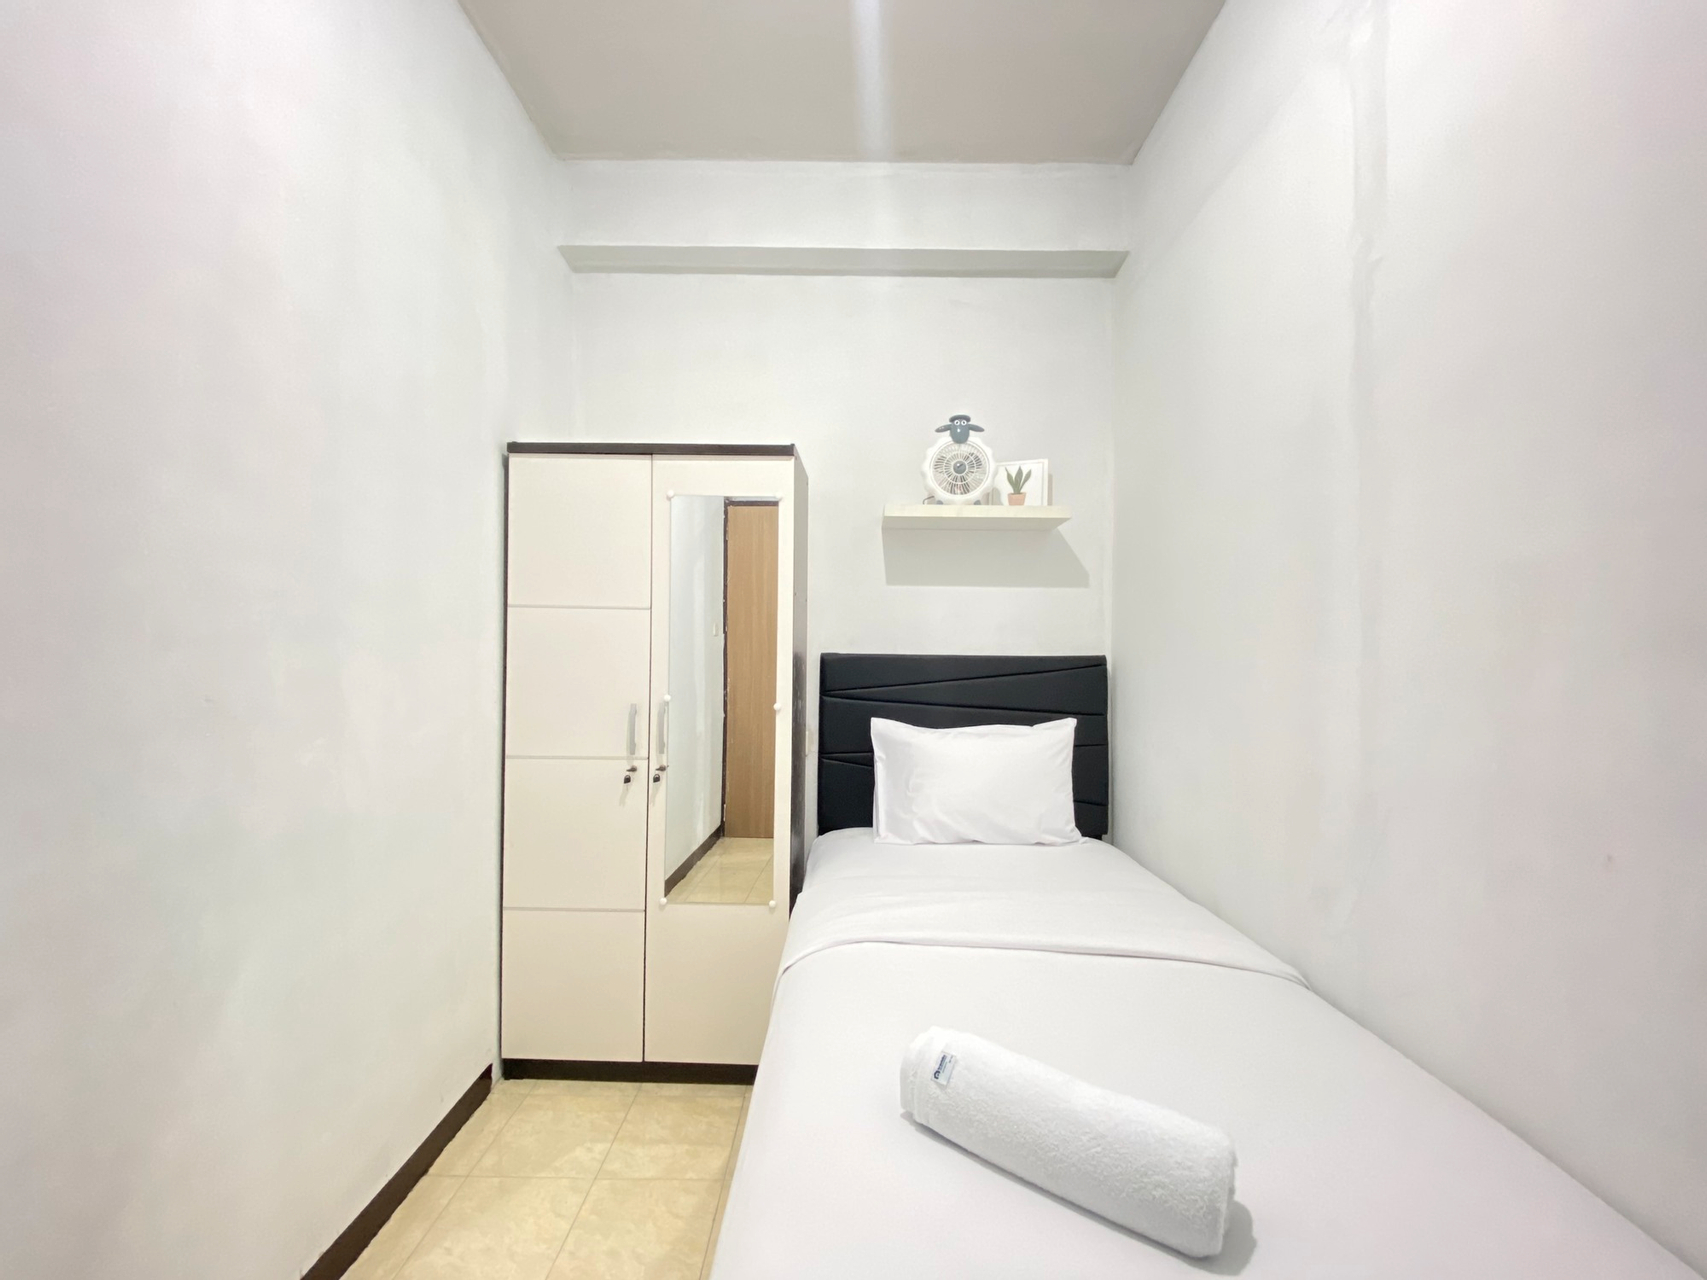 Bedroom 3, Homey 2BR Furnished  Apartment at The Edge Bandung By Travelio, Cimahi